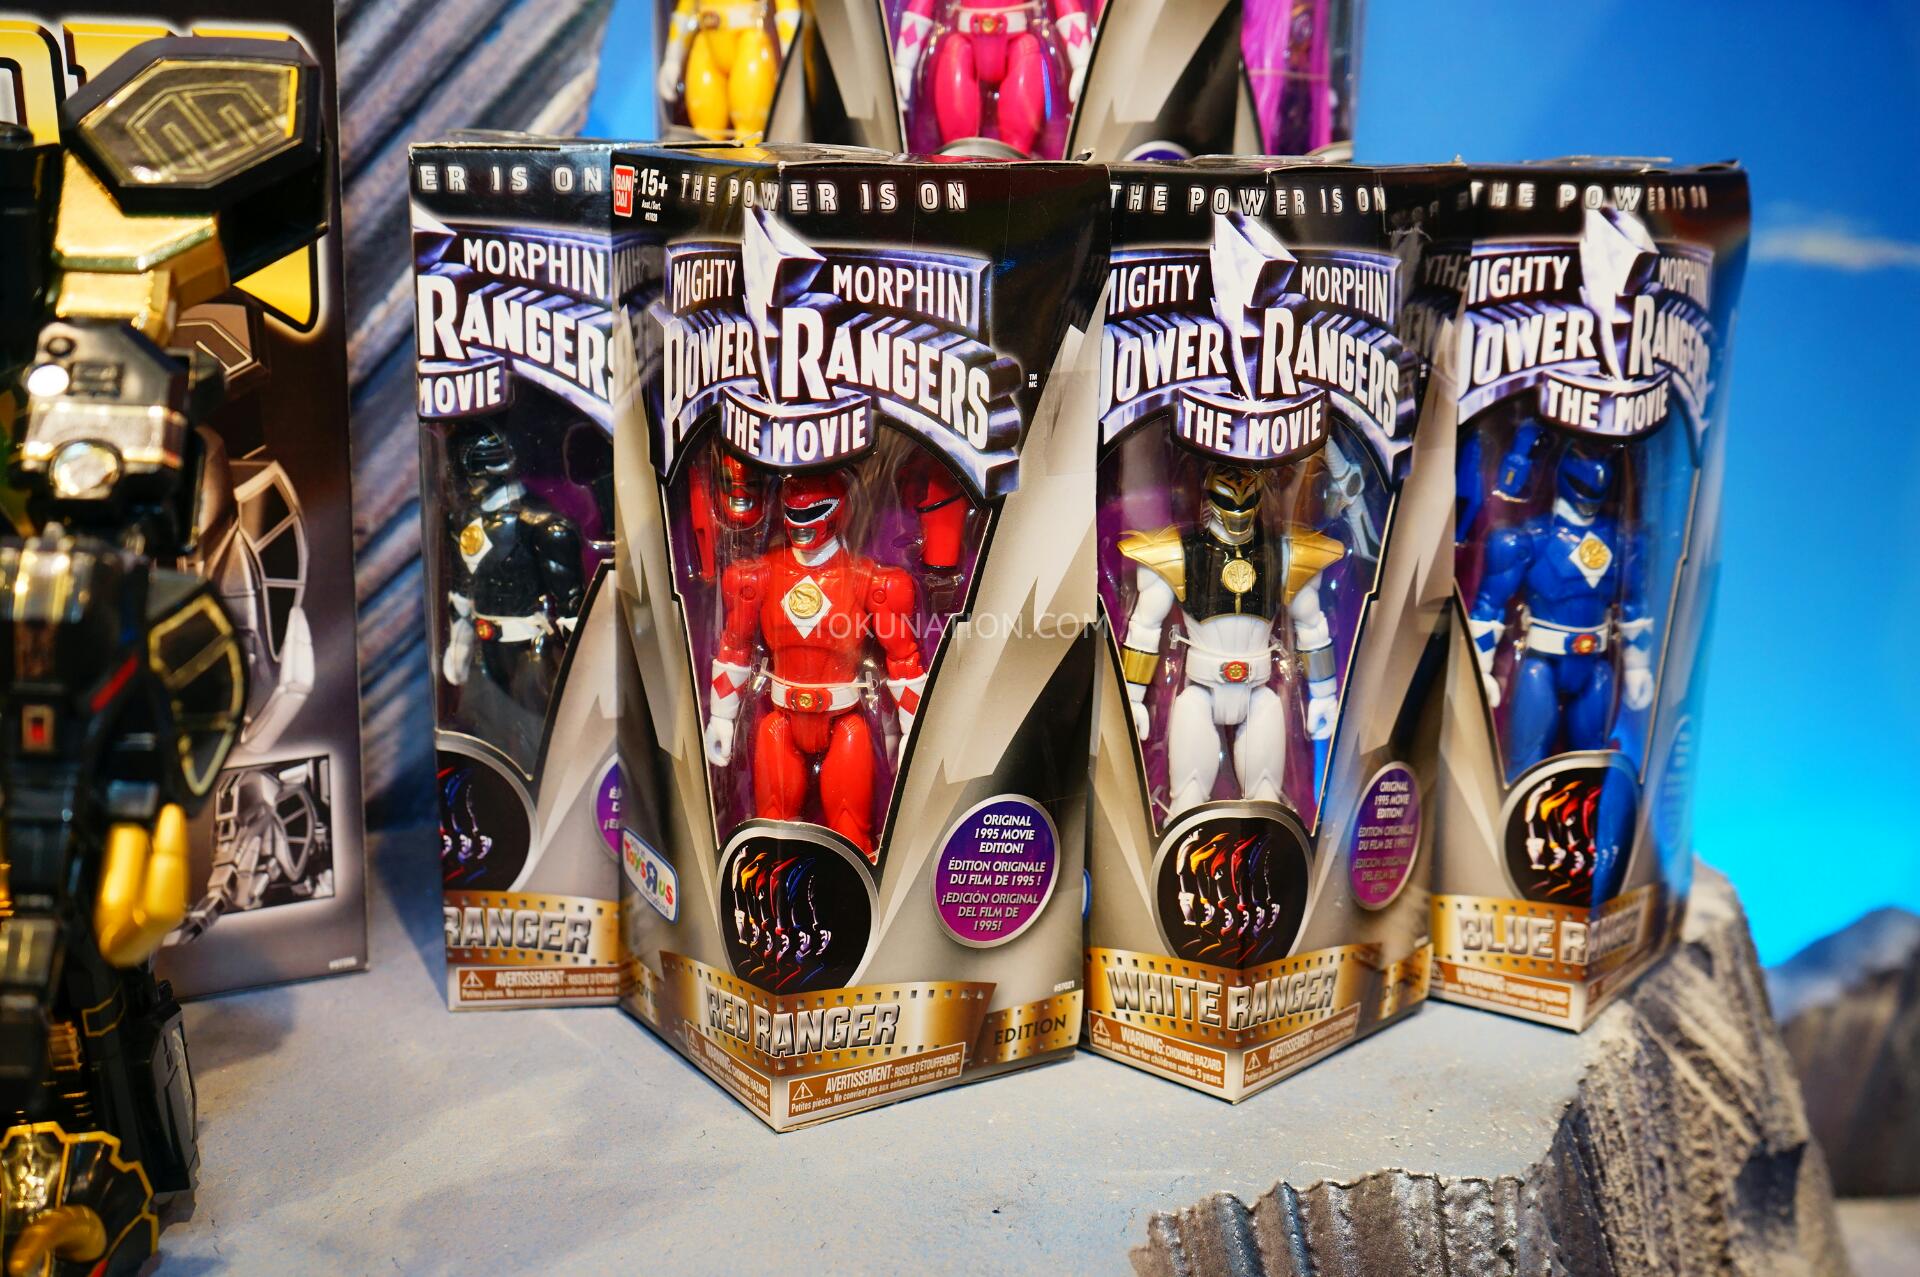 Toy Fair 2015 - Legacy Power Rangers - Movie Figures, Black and Gold ...
